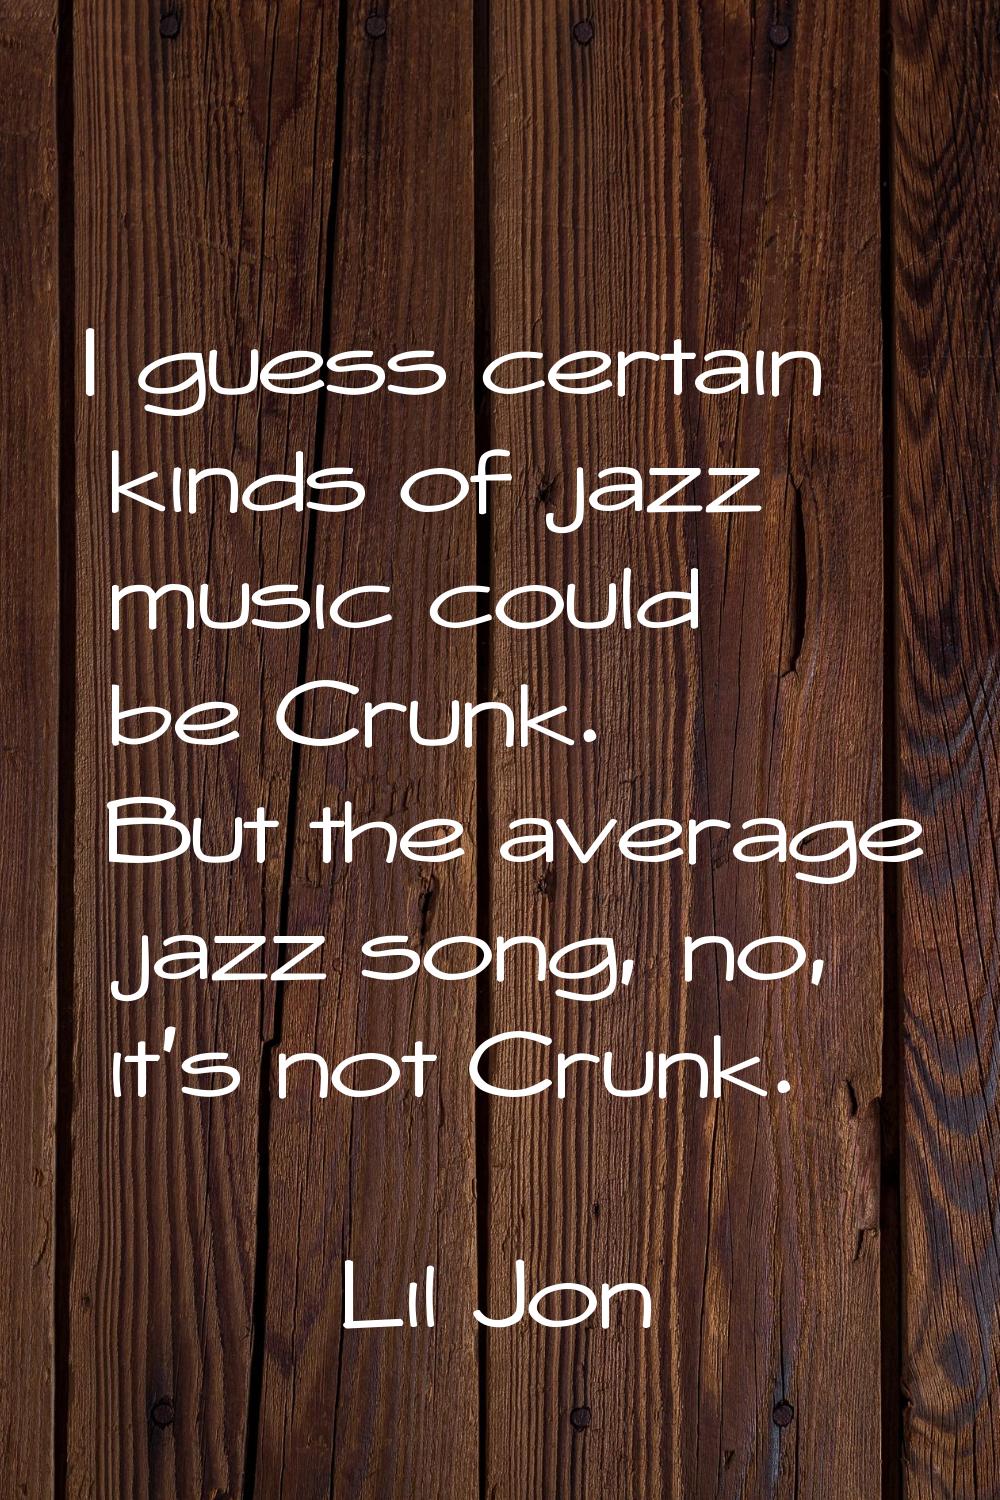 I guess certain kinds of jazz music could be Crunk. But the average jazz song, no, it's not Crunk.